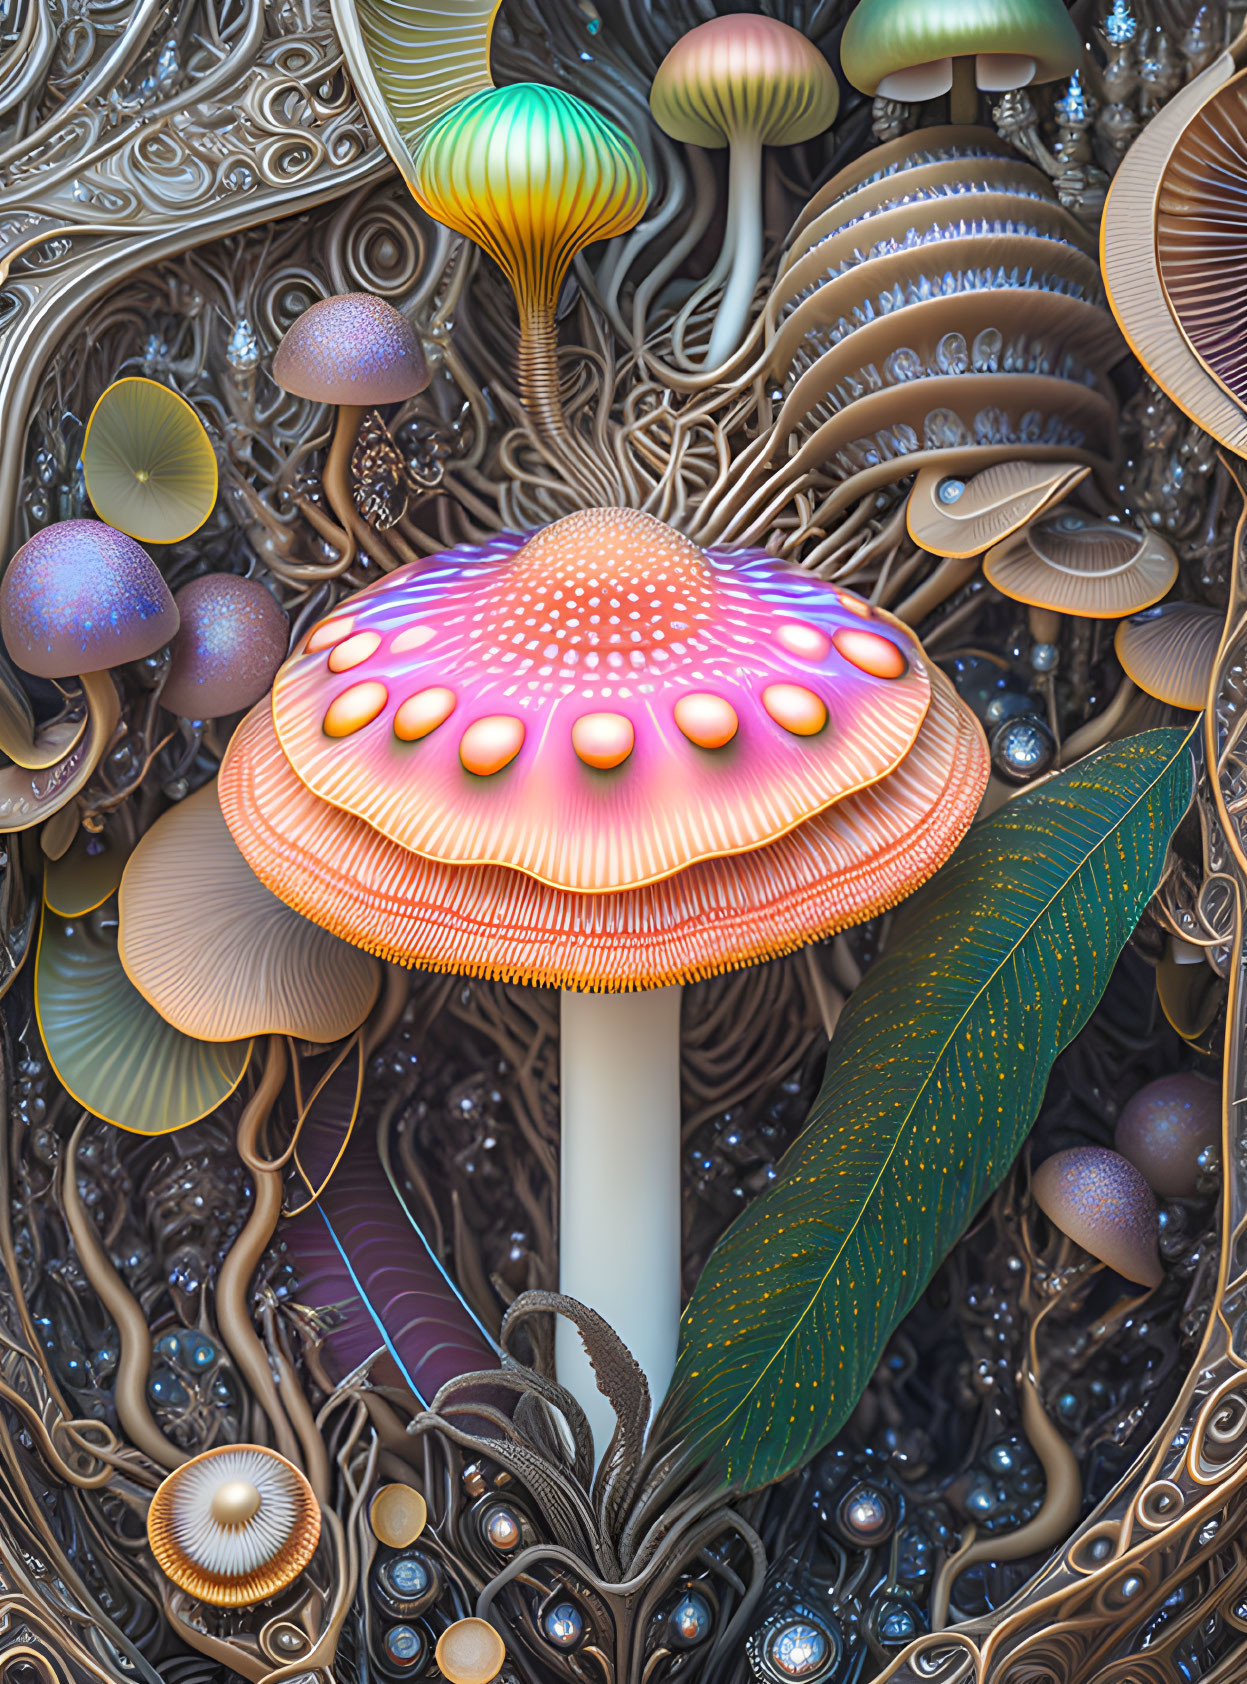 Colorful psychedelic artwork with stylized mushroom and fantasy elements